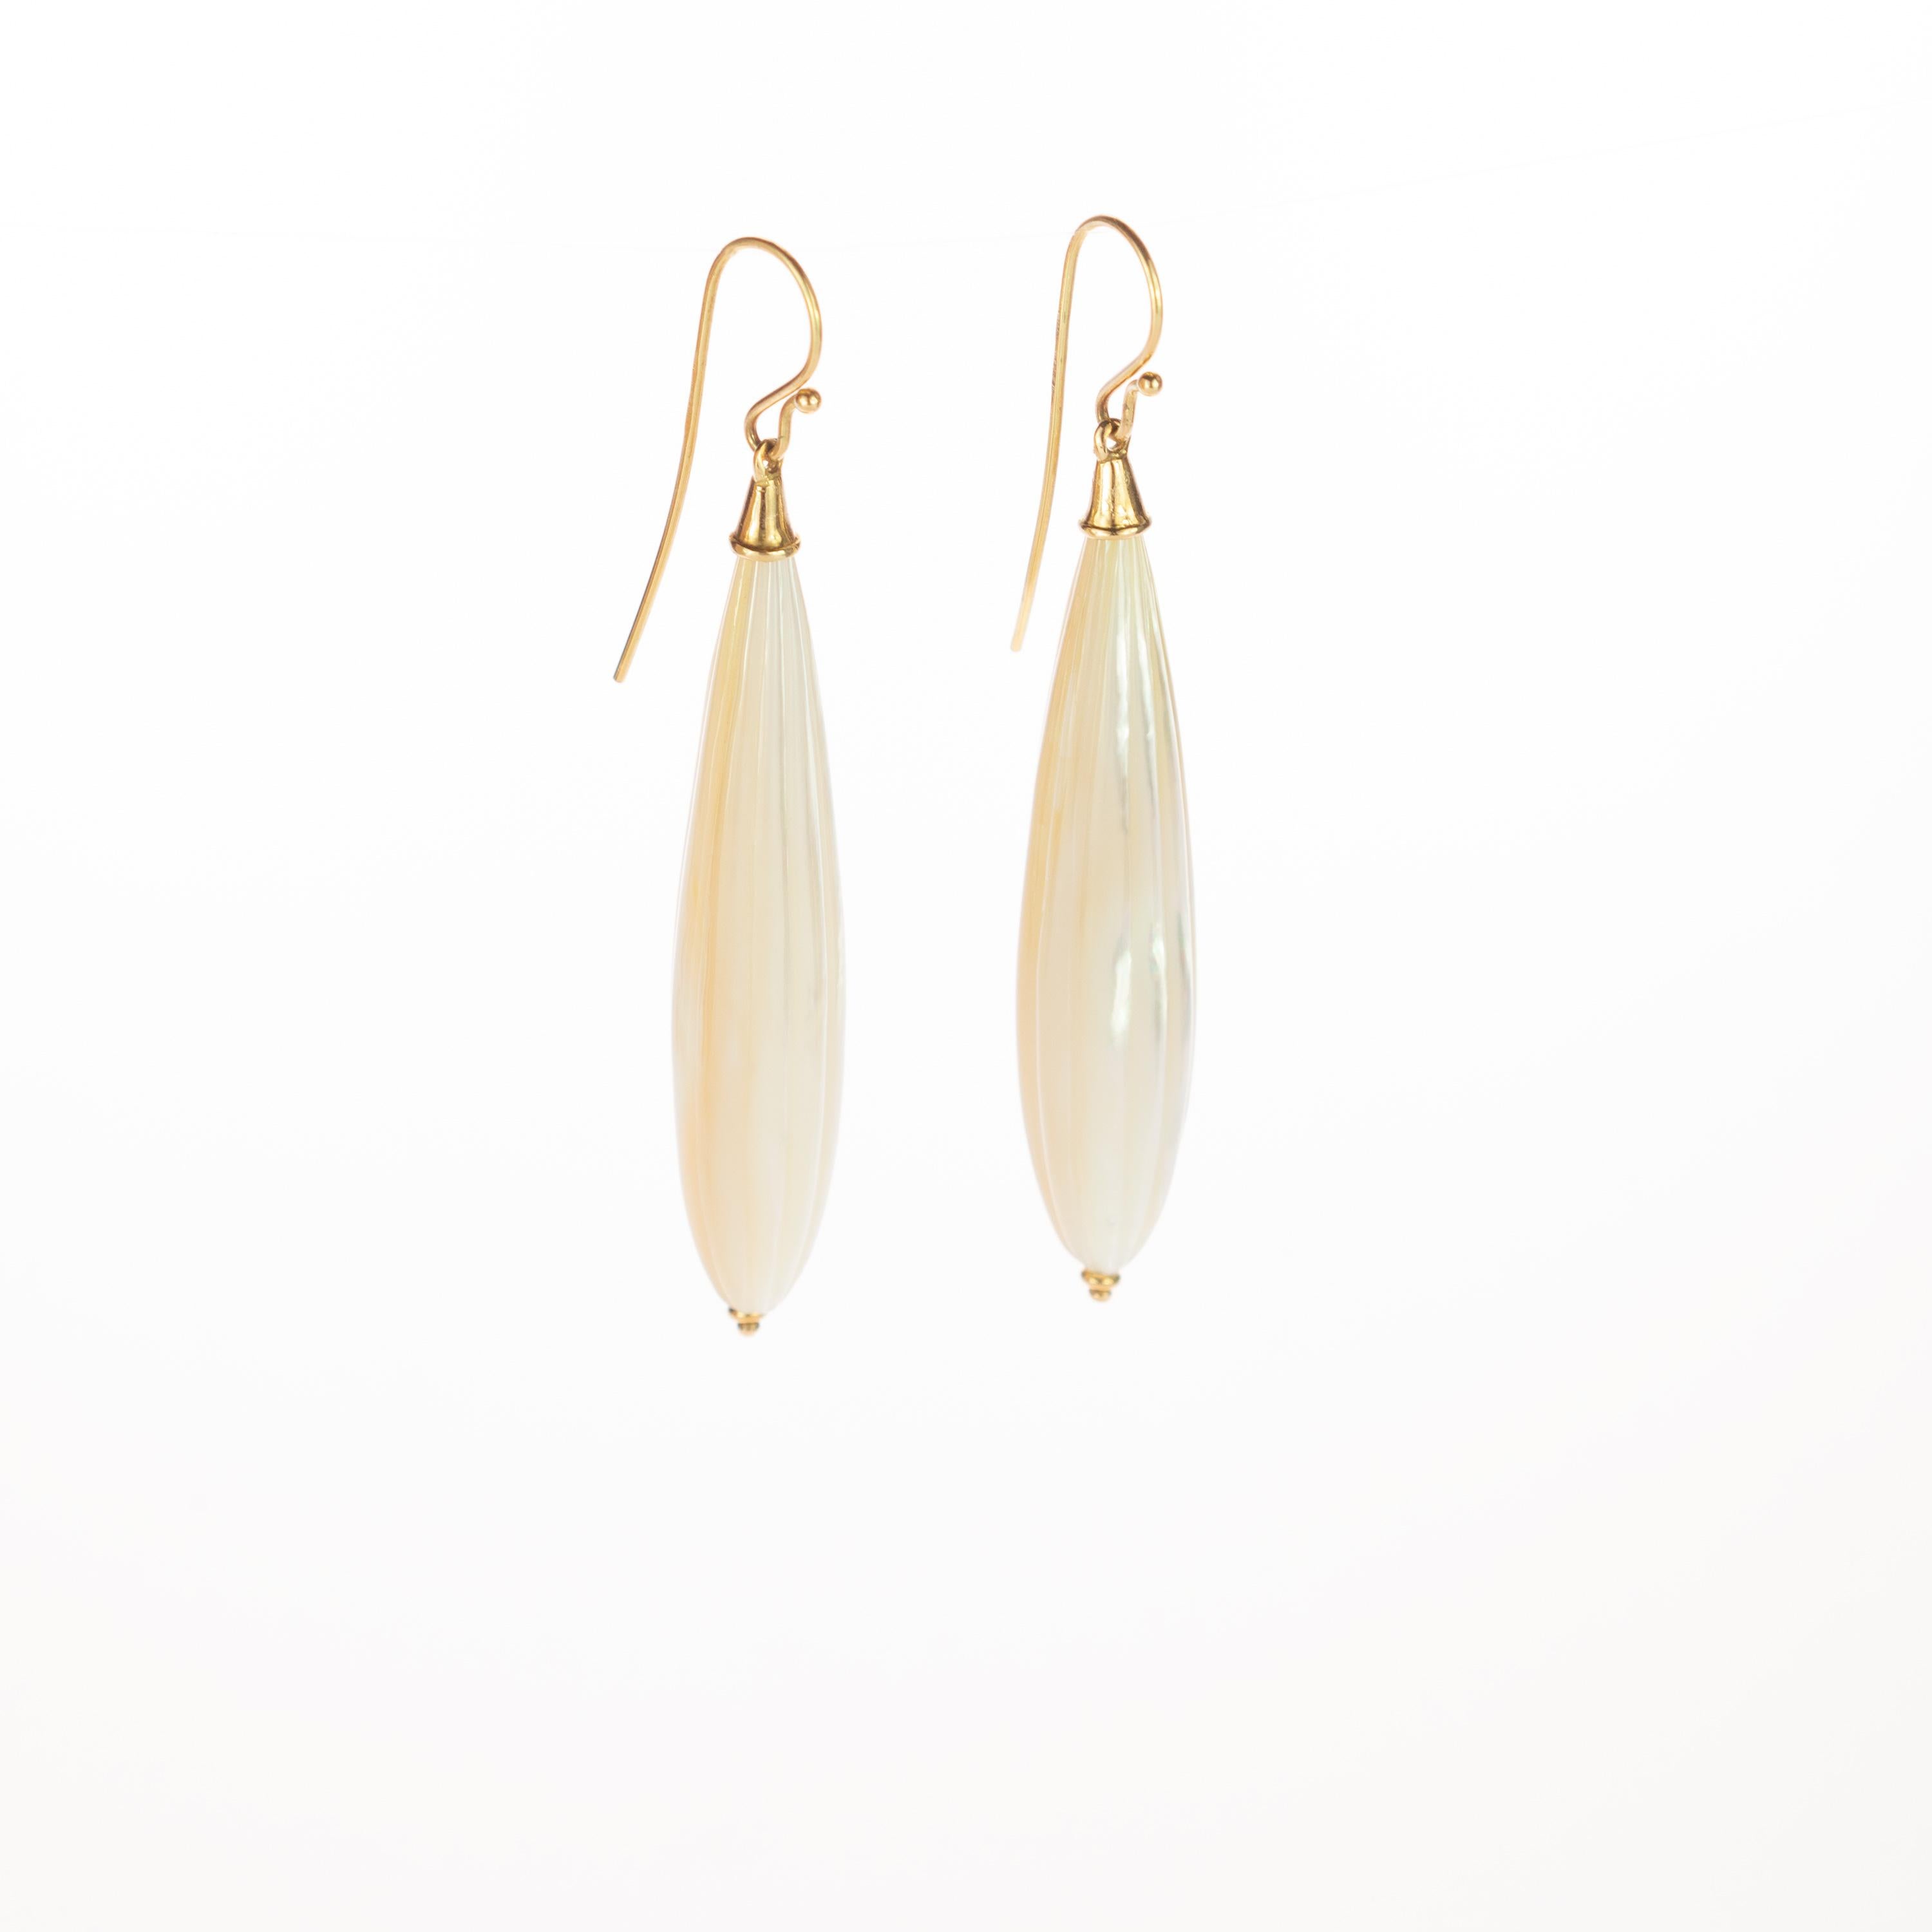 Mother of Pearl  drops combining voluminous shapes with vivid natural colours, resulting in bold, free-spirited pieces with a charming elegance. This piece design is inspired in the natural, simple, clean and smooth characteristics of the peals.